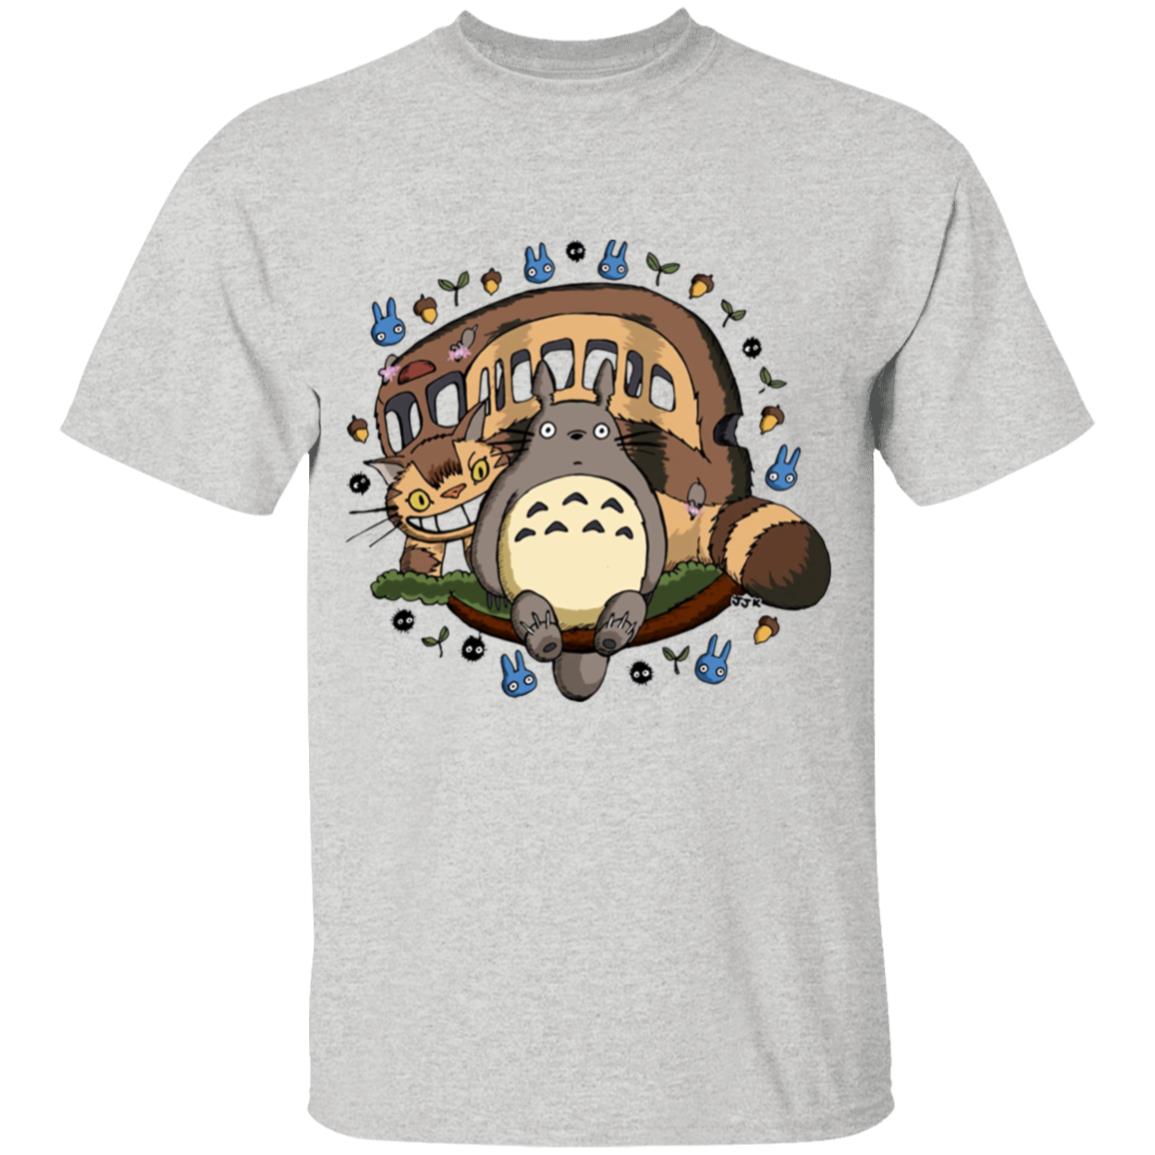 Totoro and the Catbus T Shirt for Kid Ghibli Store ghibli.store